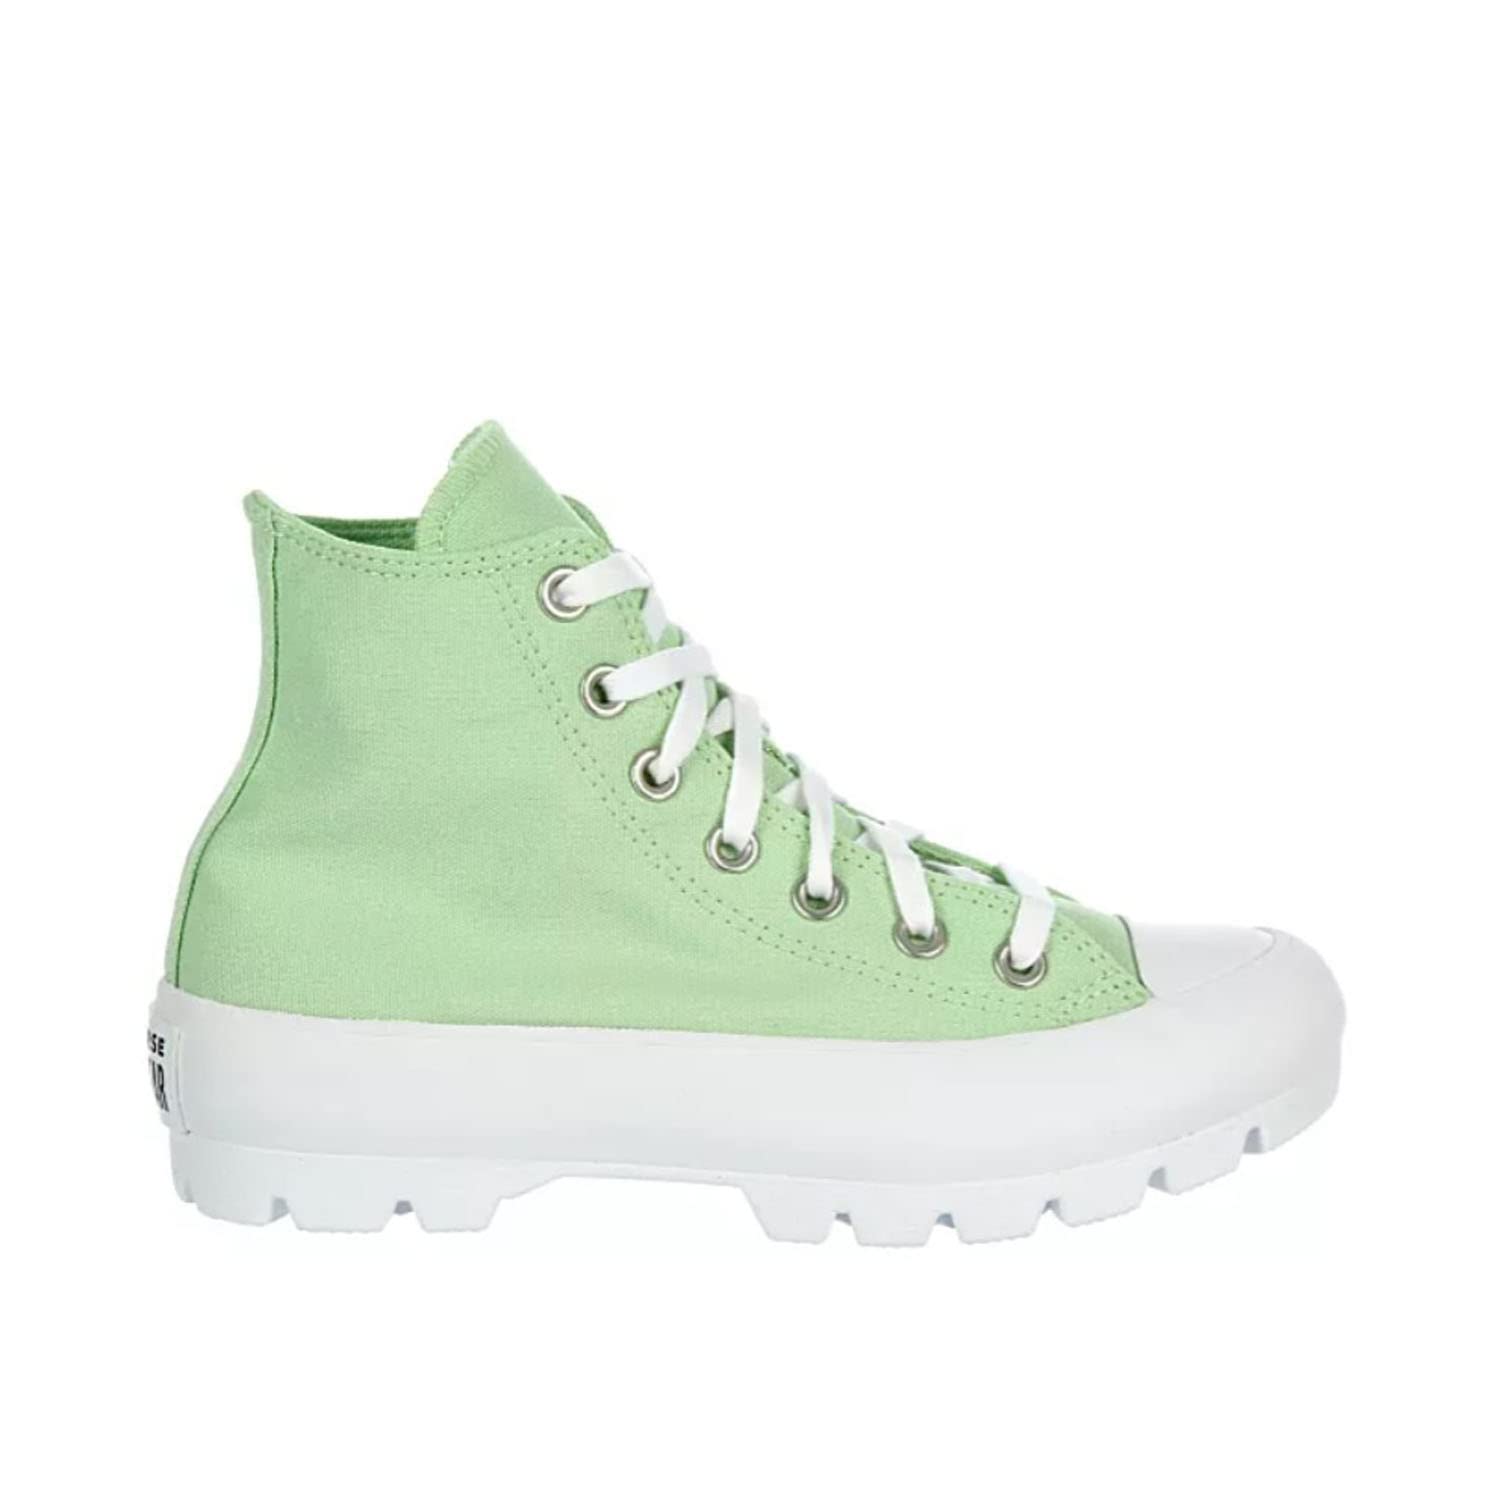 Converse Unisex Chuck Taylor All Star Lugged High Canvas Sneaker - Lace up Closure Style - Neon Mint/White/Black